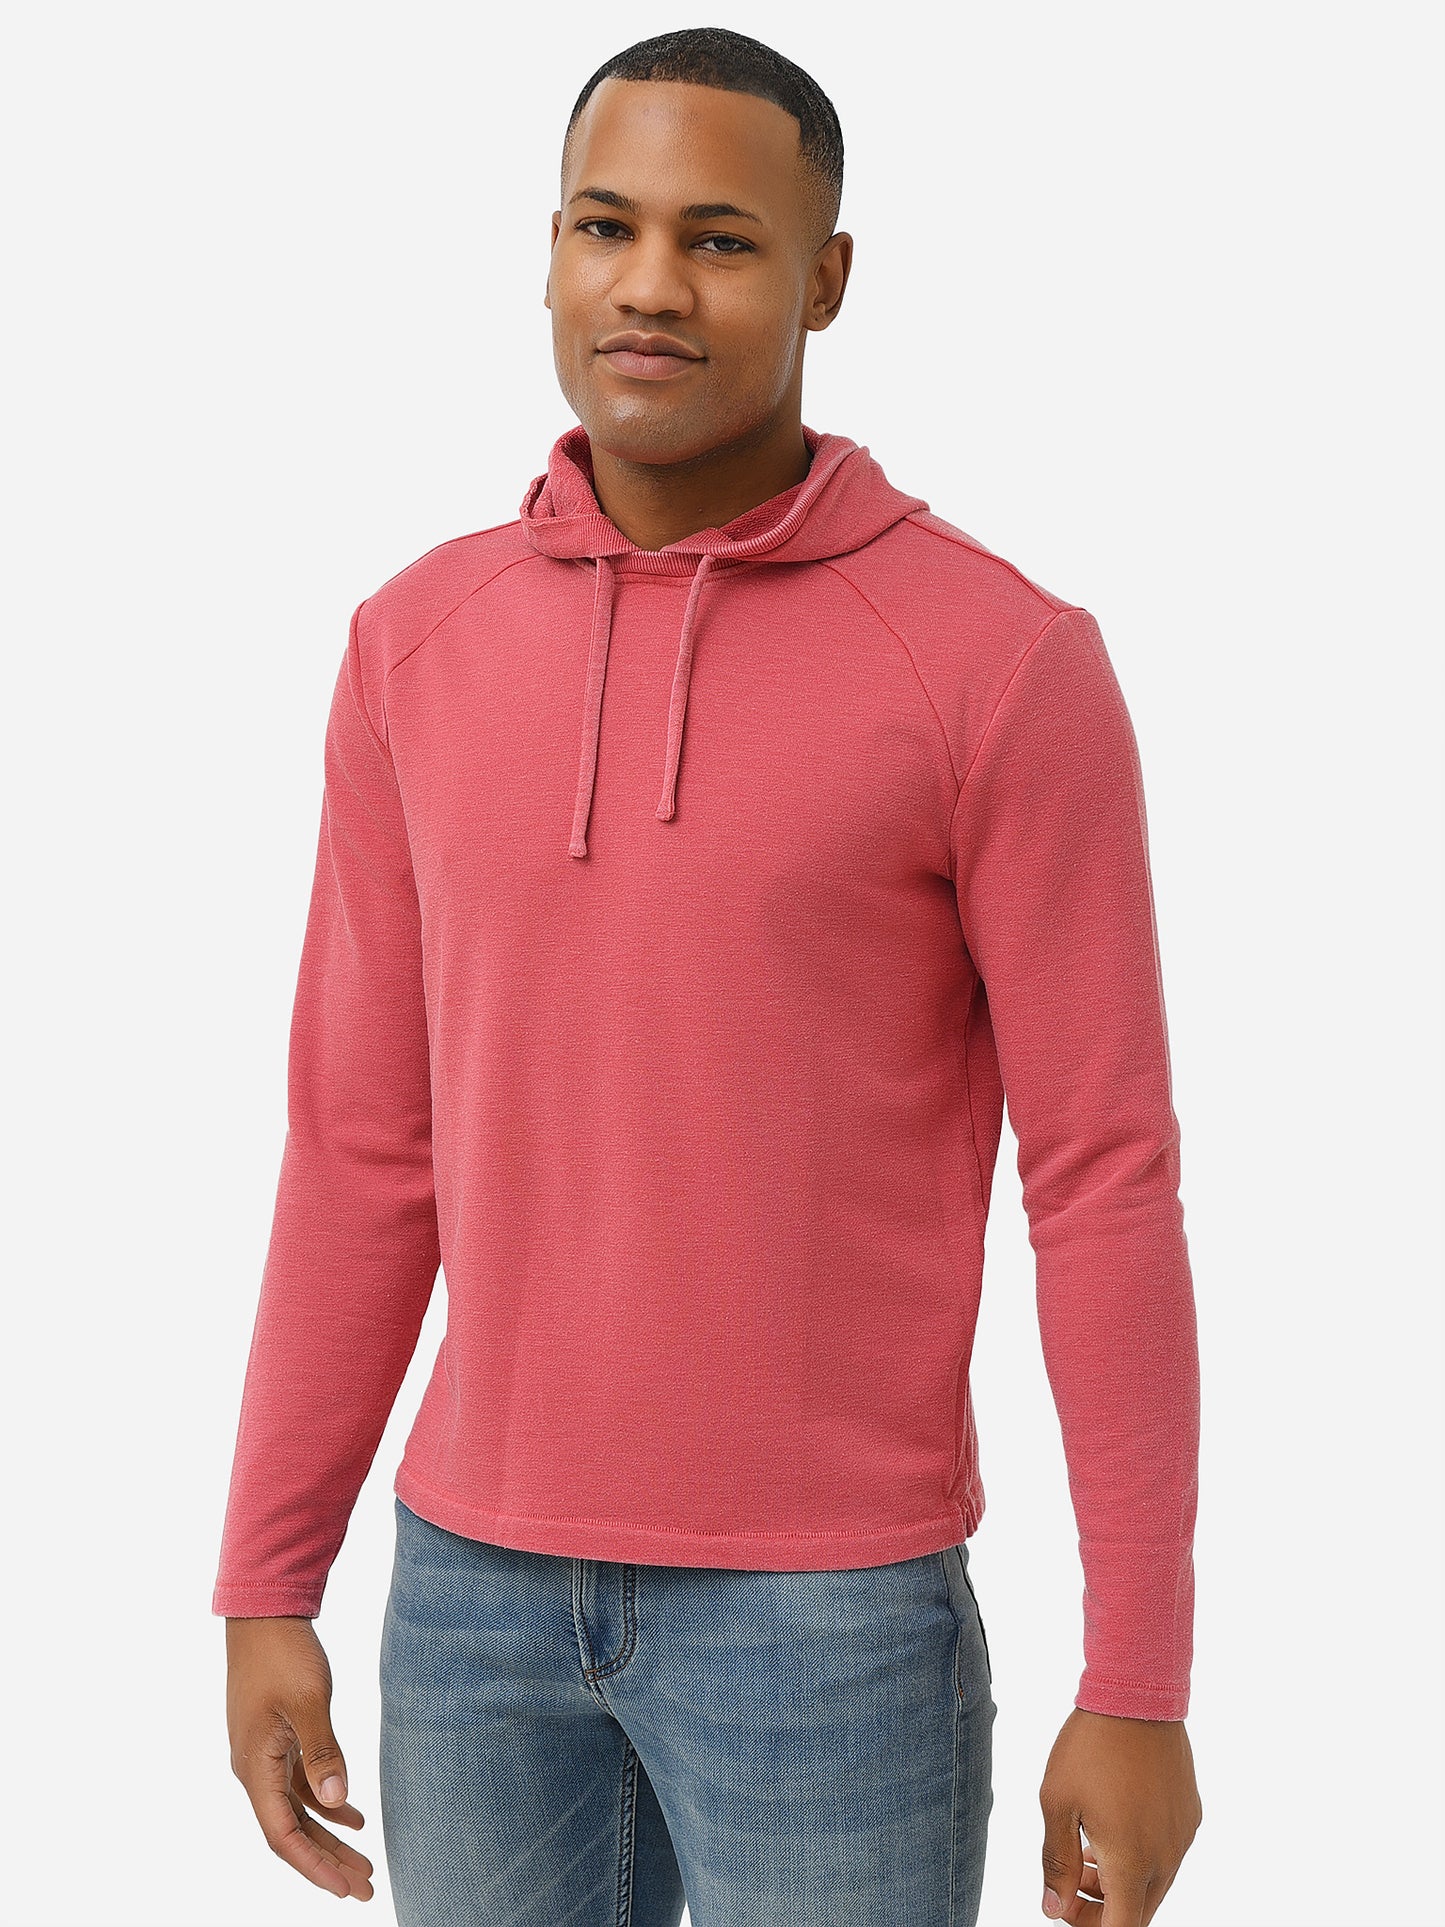 Johnnie-O Men's Satchel Burn Out Washed Pullover Hoodie